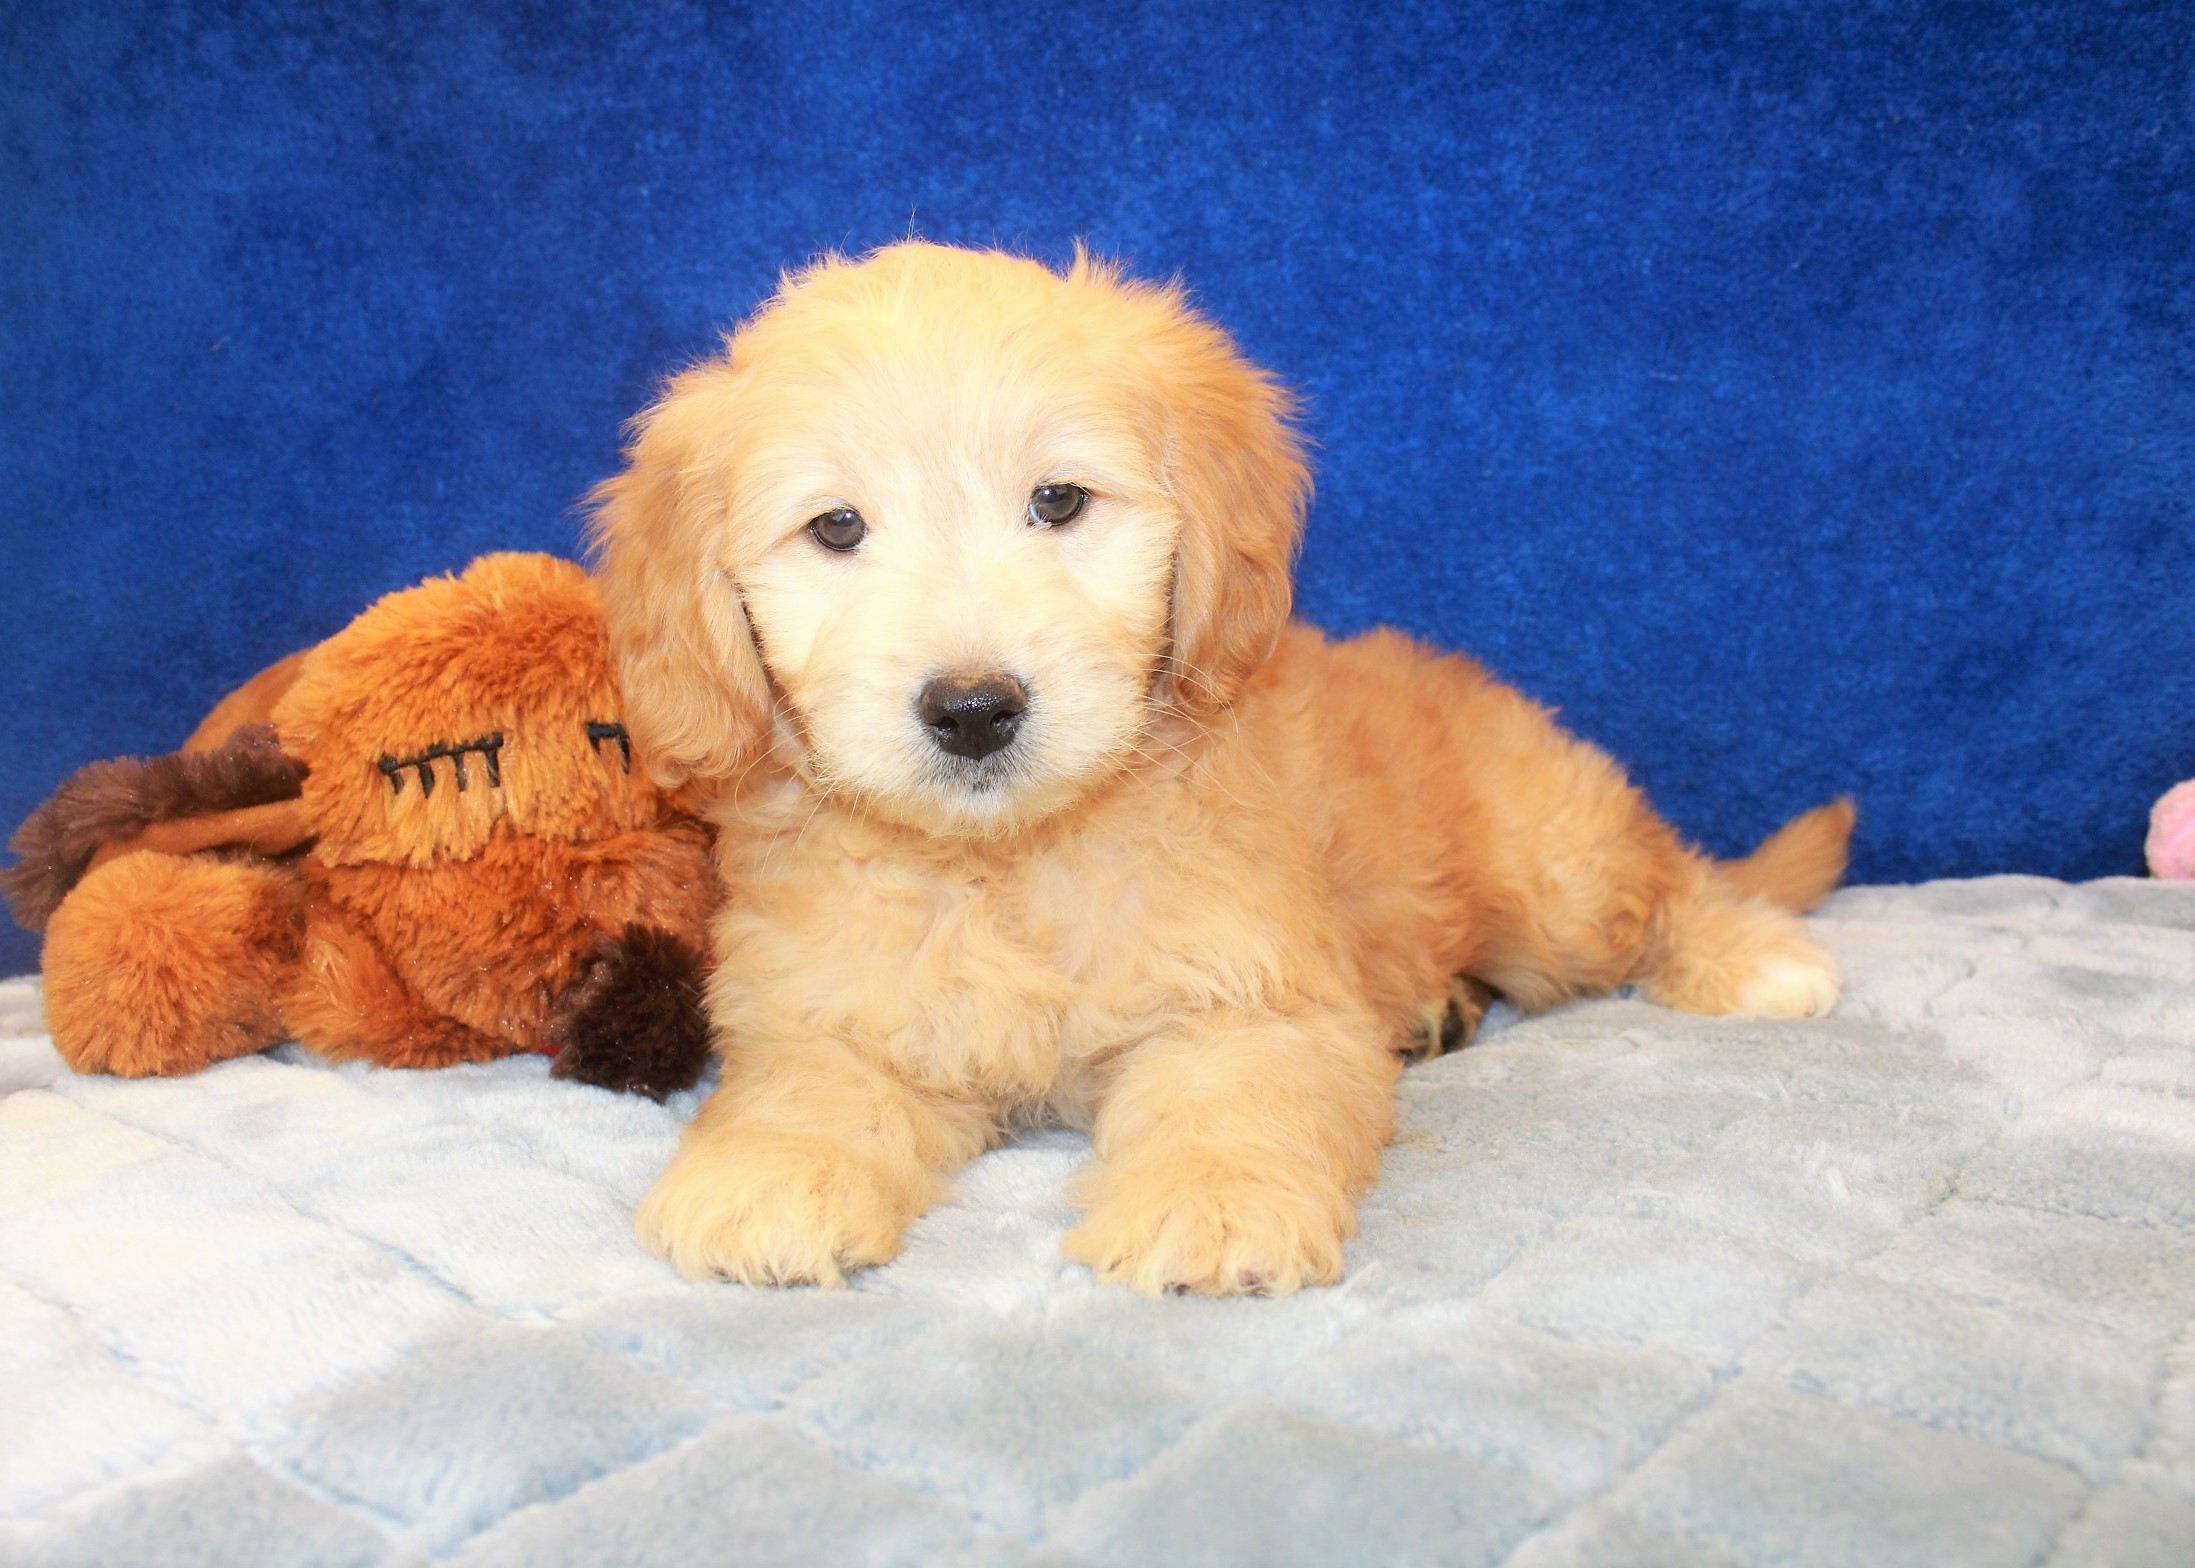 Goldendoodle-Mini Puppies For Sale - Long Island Puppies